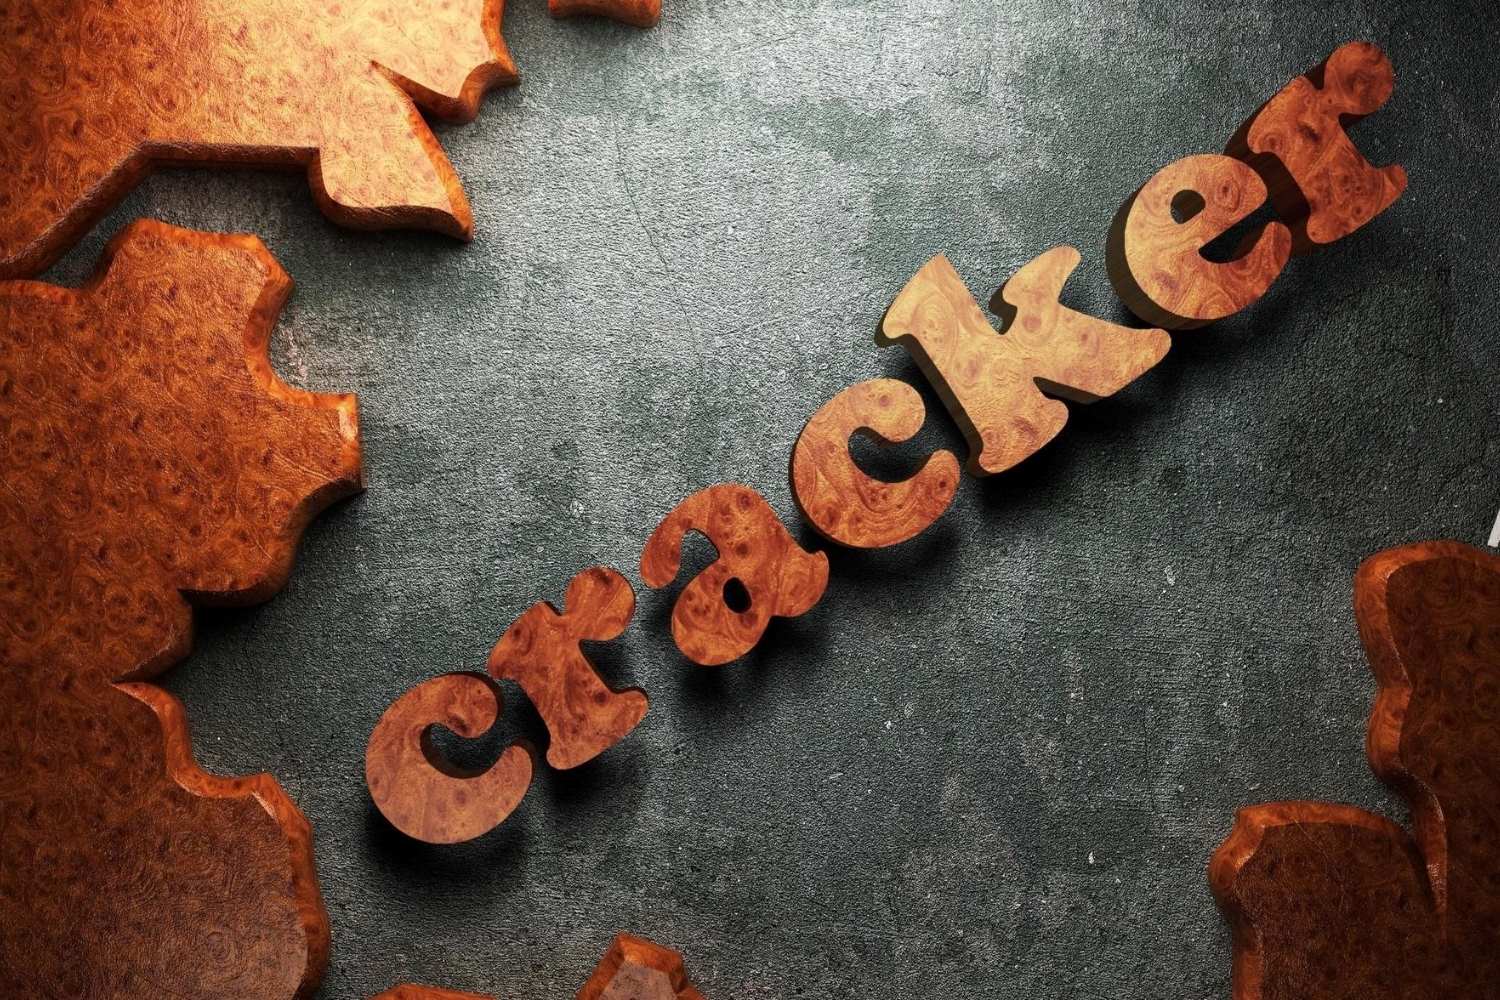 The Surprising Origin Of The Term ‘Cracker’ And Its Connection To White People